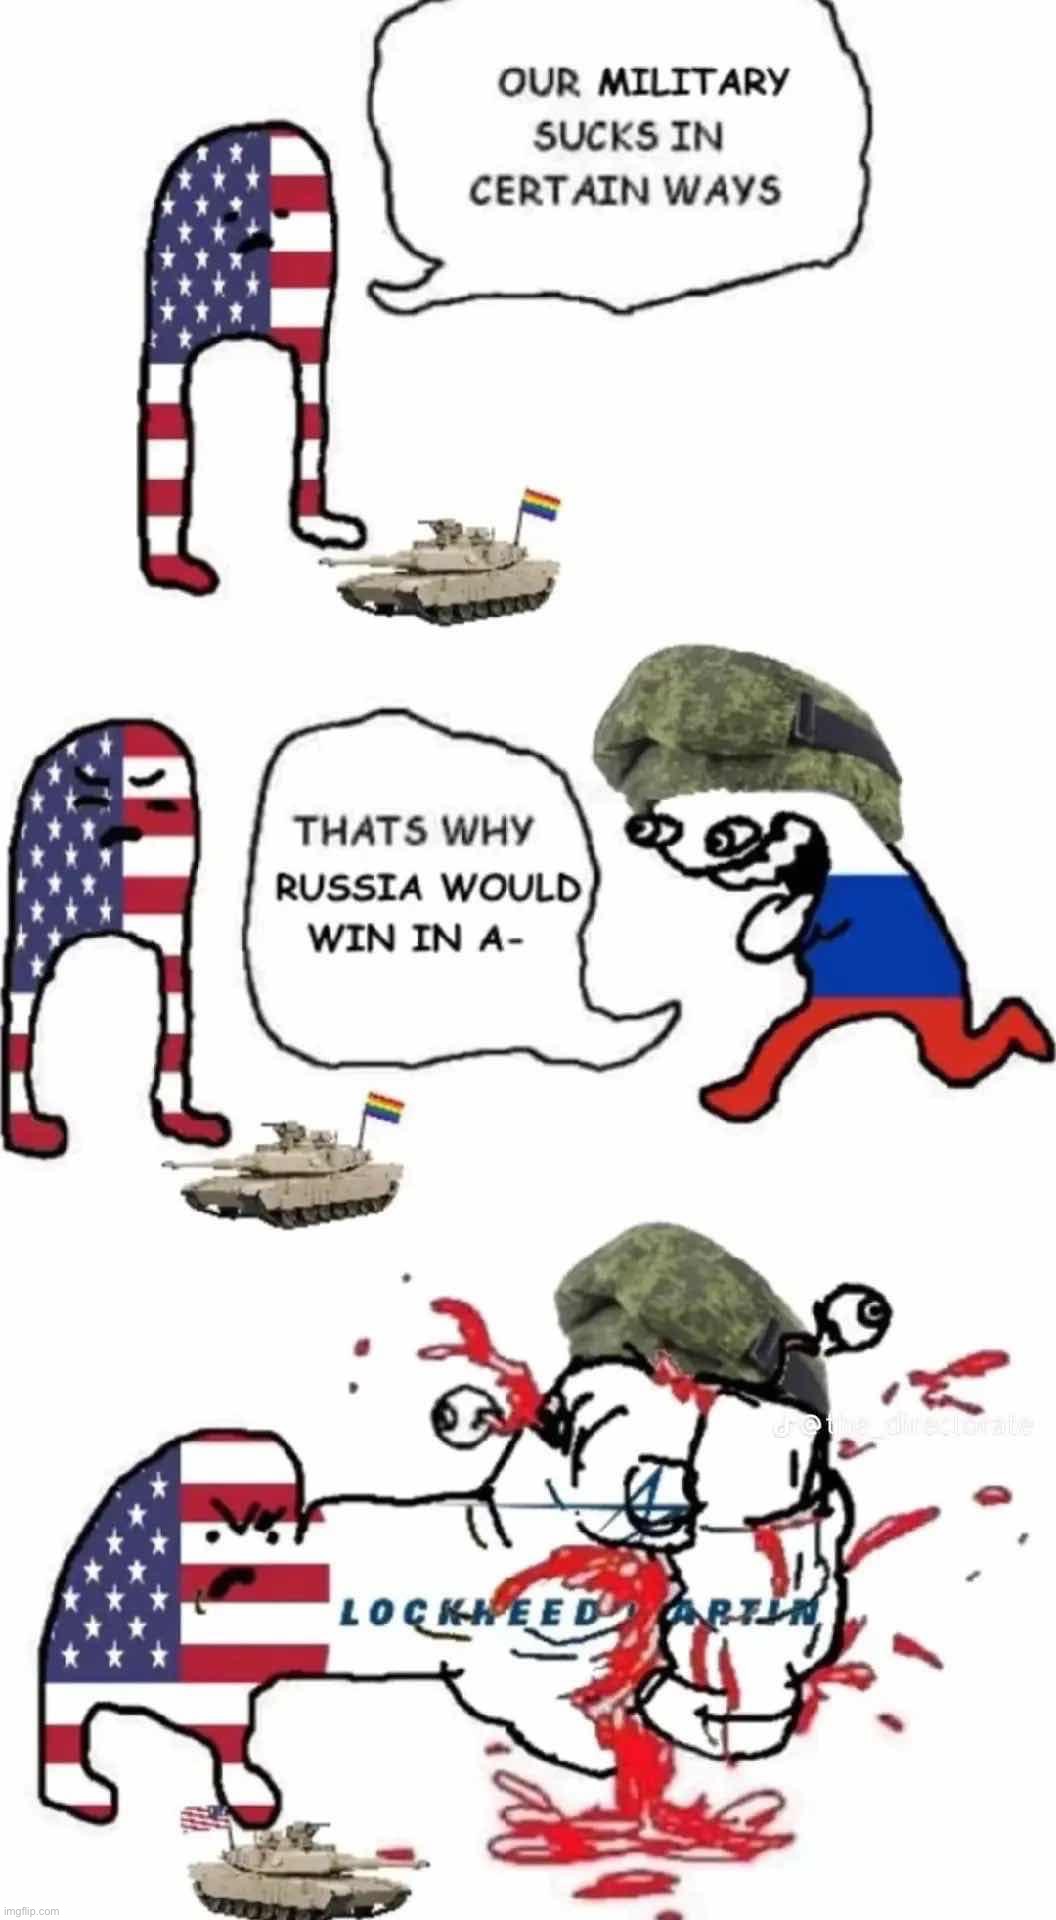 Russia would win in a— what now? Couldn’t hear you | image tagged in russia squeezed by lockheed martin,b,a,s,e,d | made w/ Imgflip meme maker